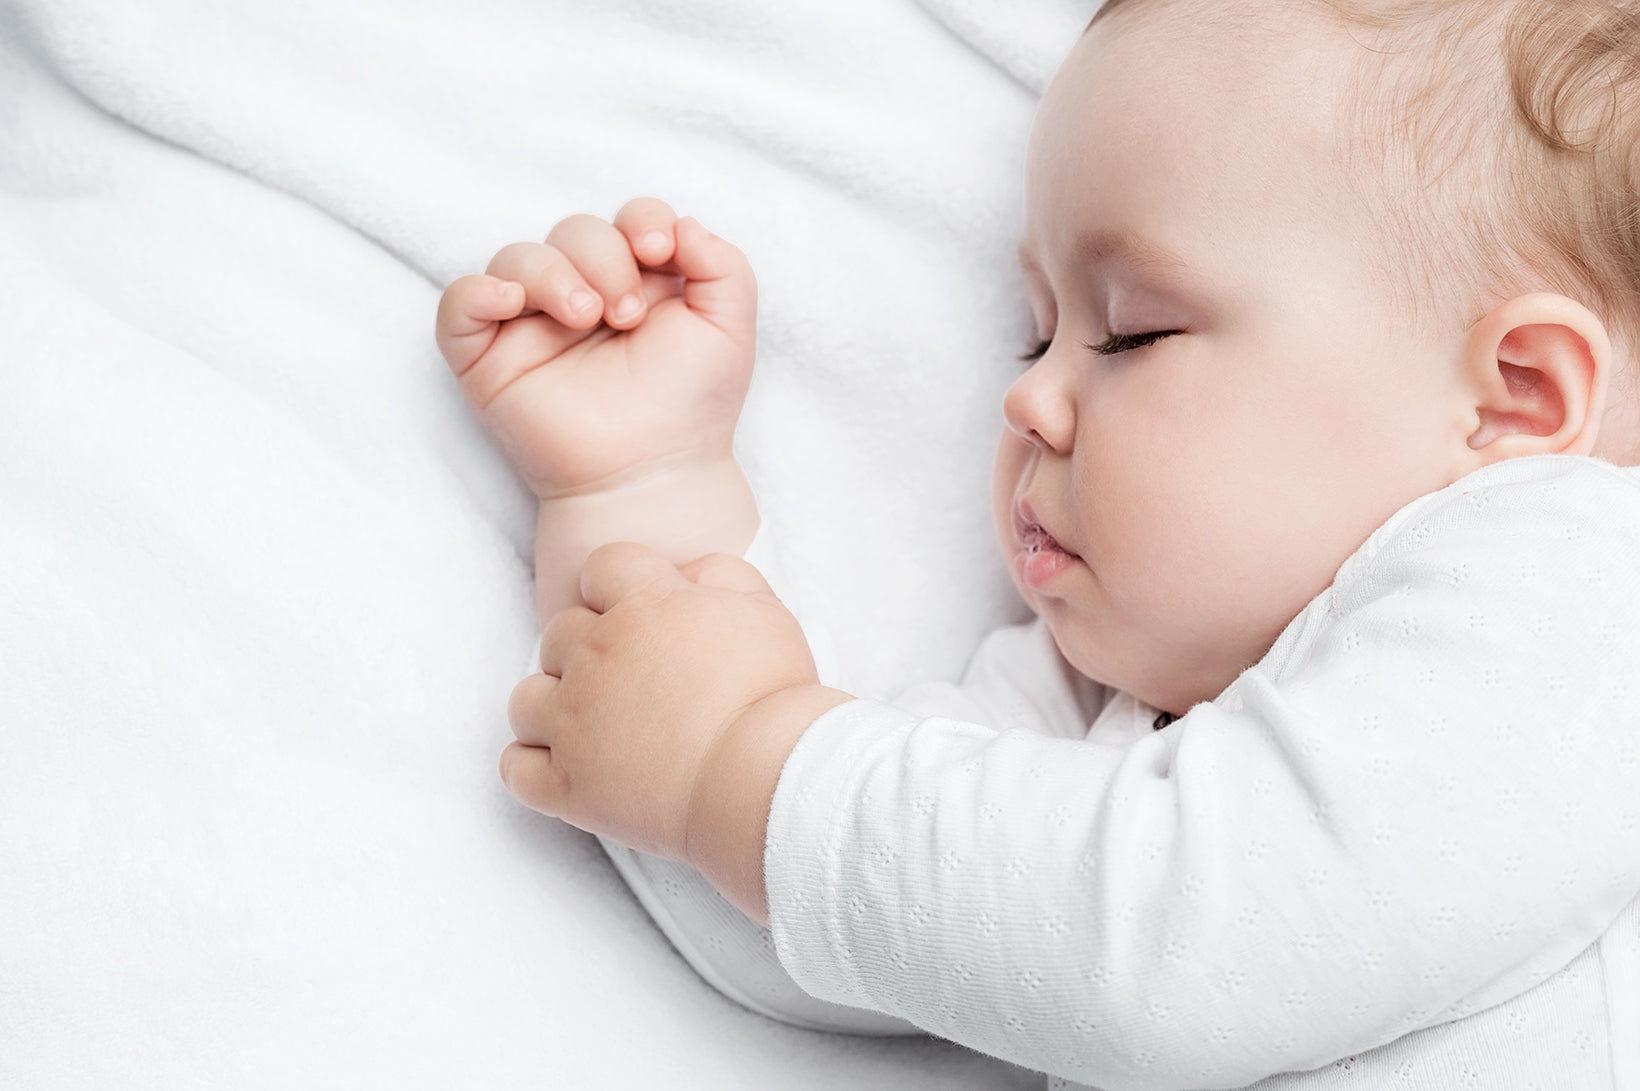 Novice mothers need to master the skills to coax their babies to sleep